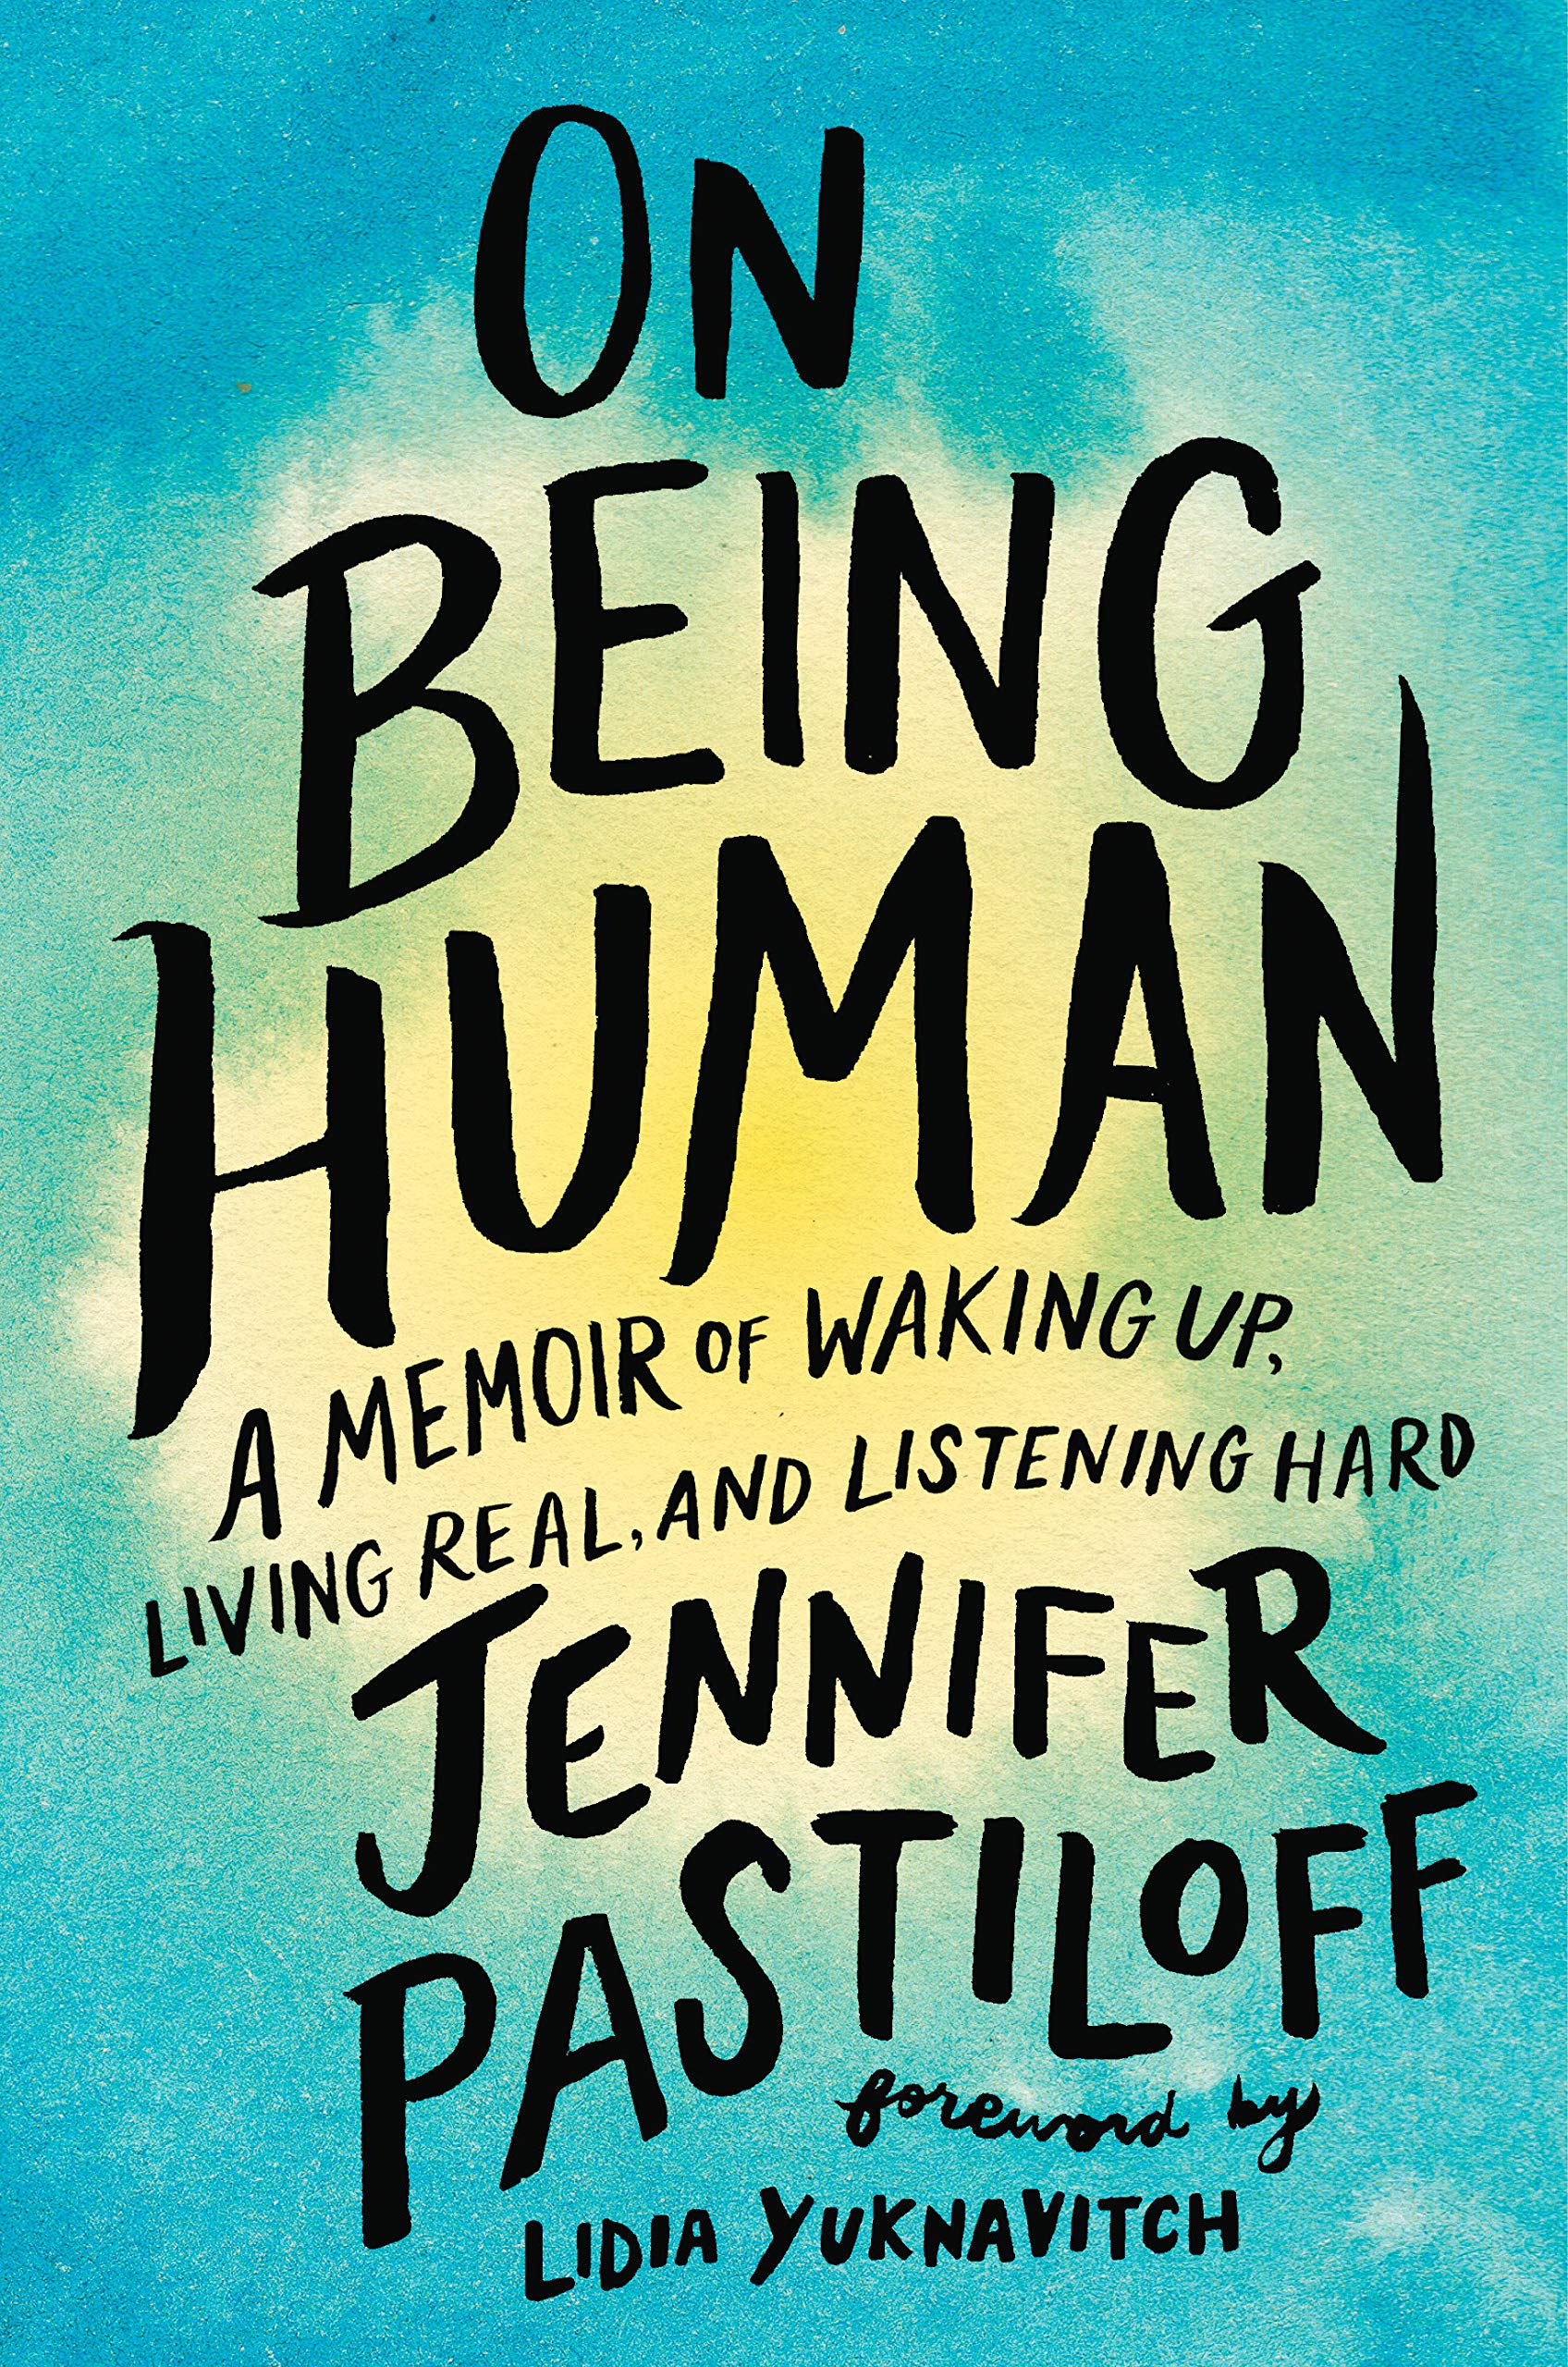 Book Cover On Being Human: A Memoir of Waking Up, Living Real, and Listening Hard